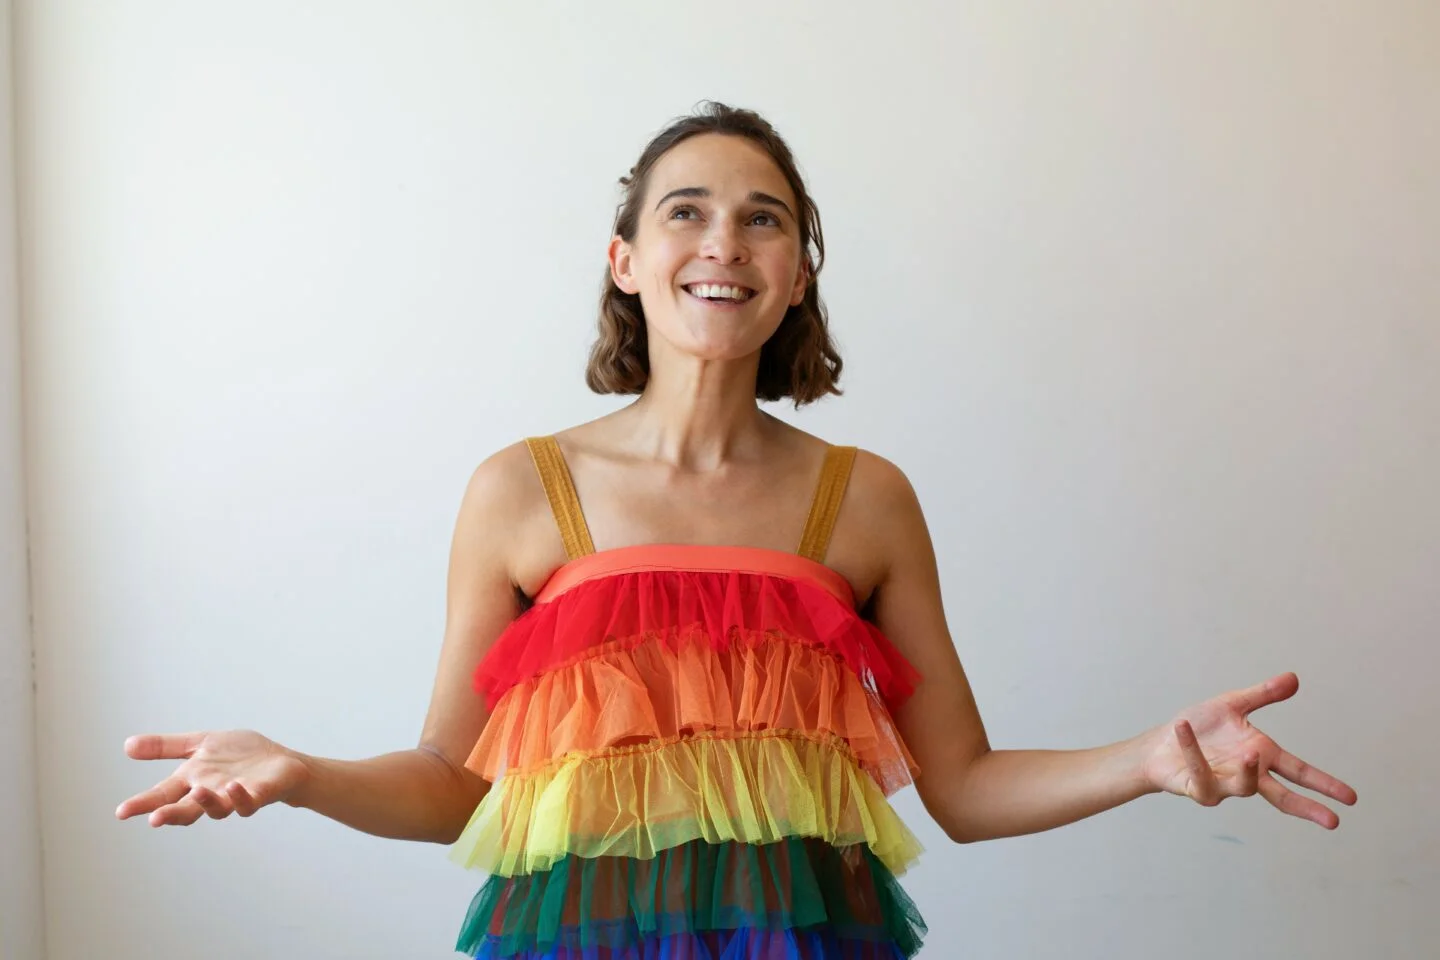 Philippa in a rainbow dress smiling on a white background